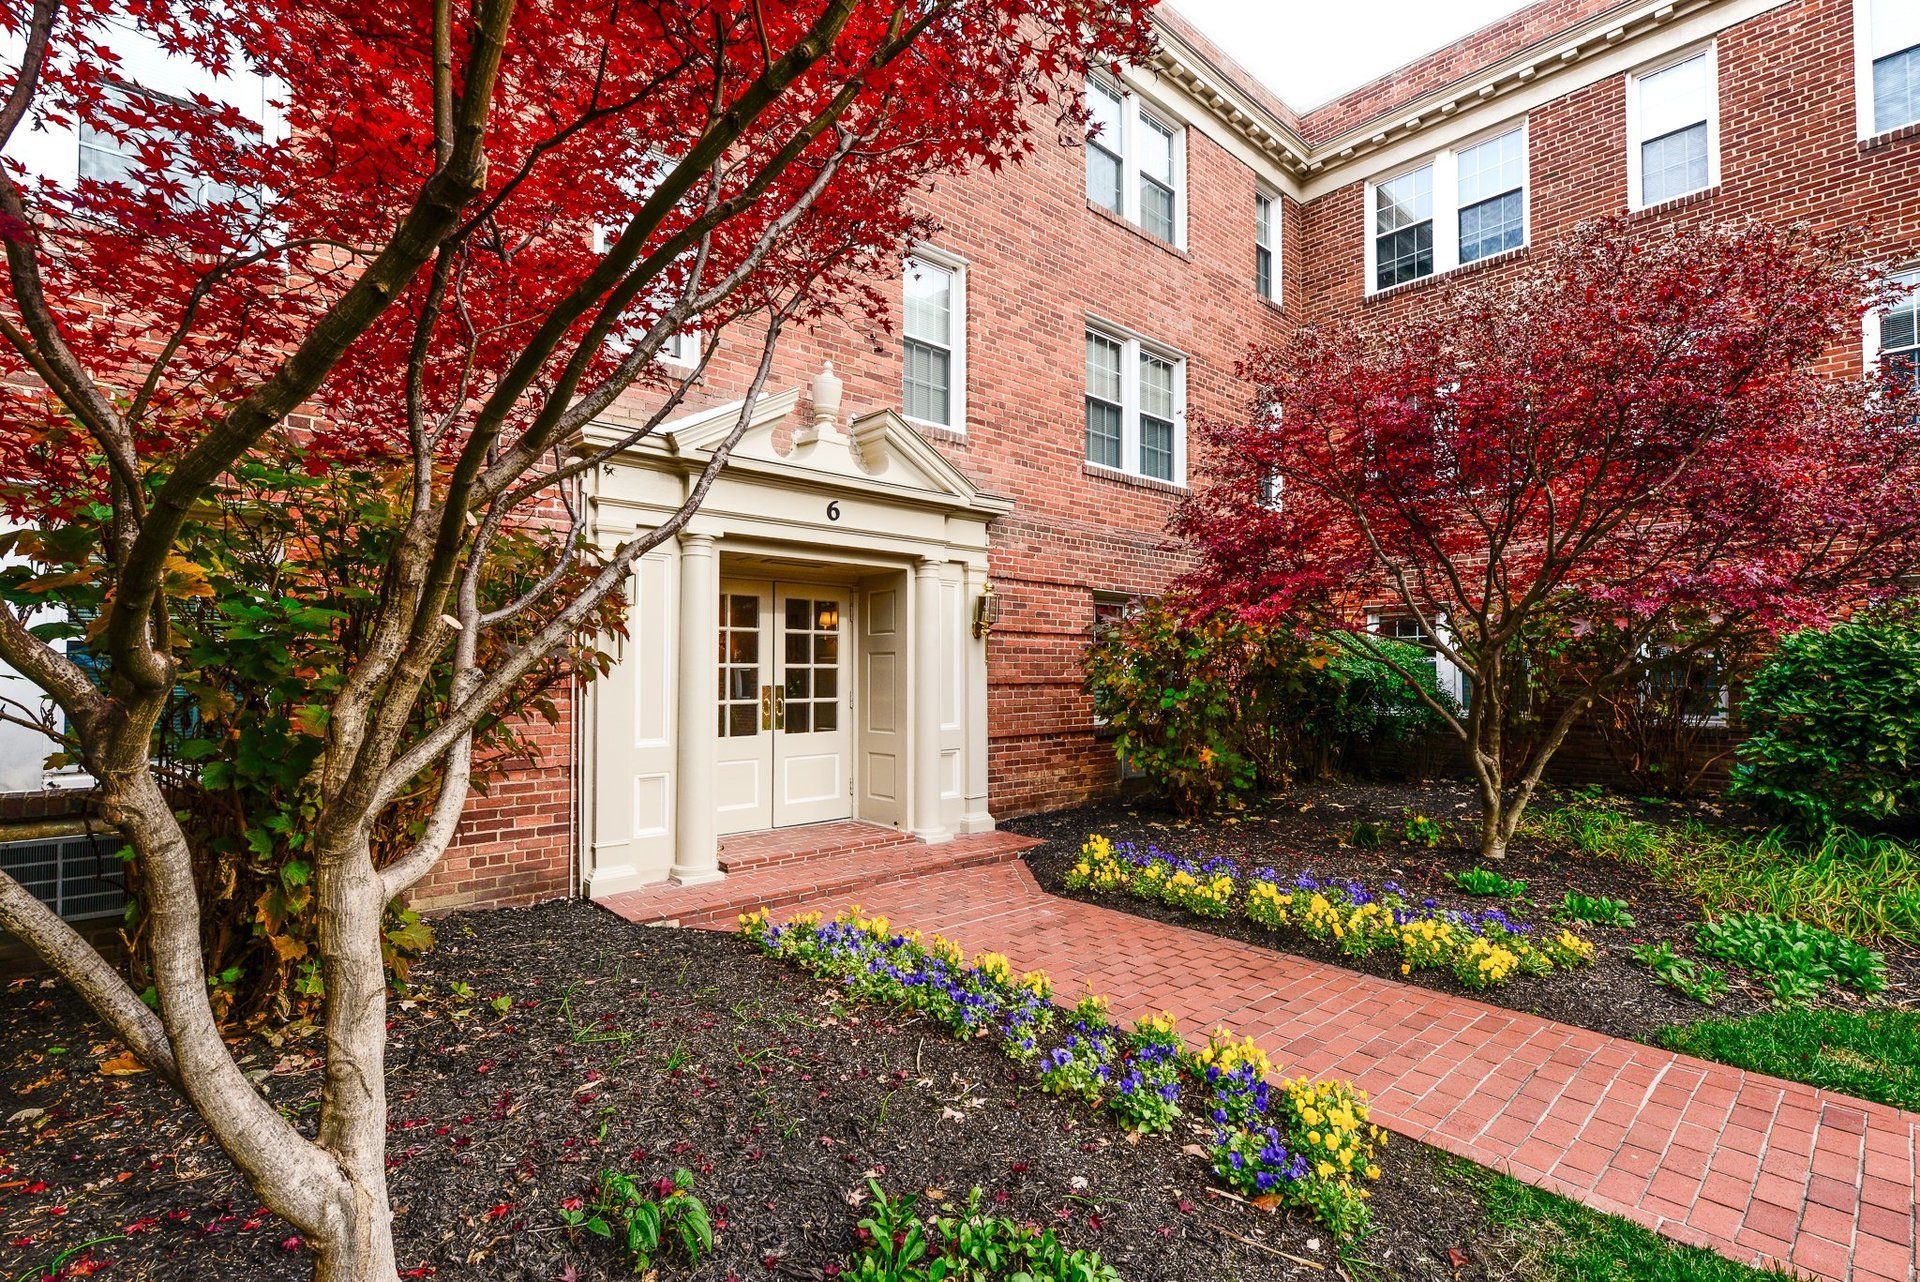 What a wonderful world at Manor House Apartments in Del Ray, Alexandria, VA